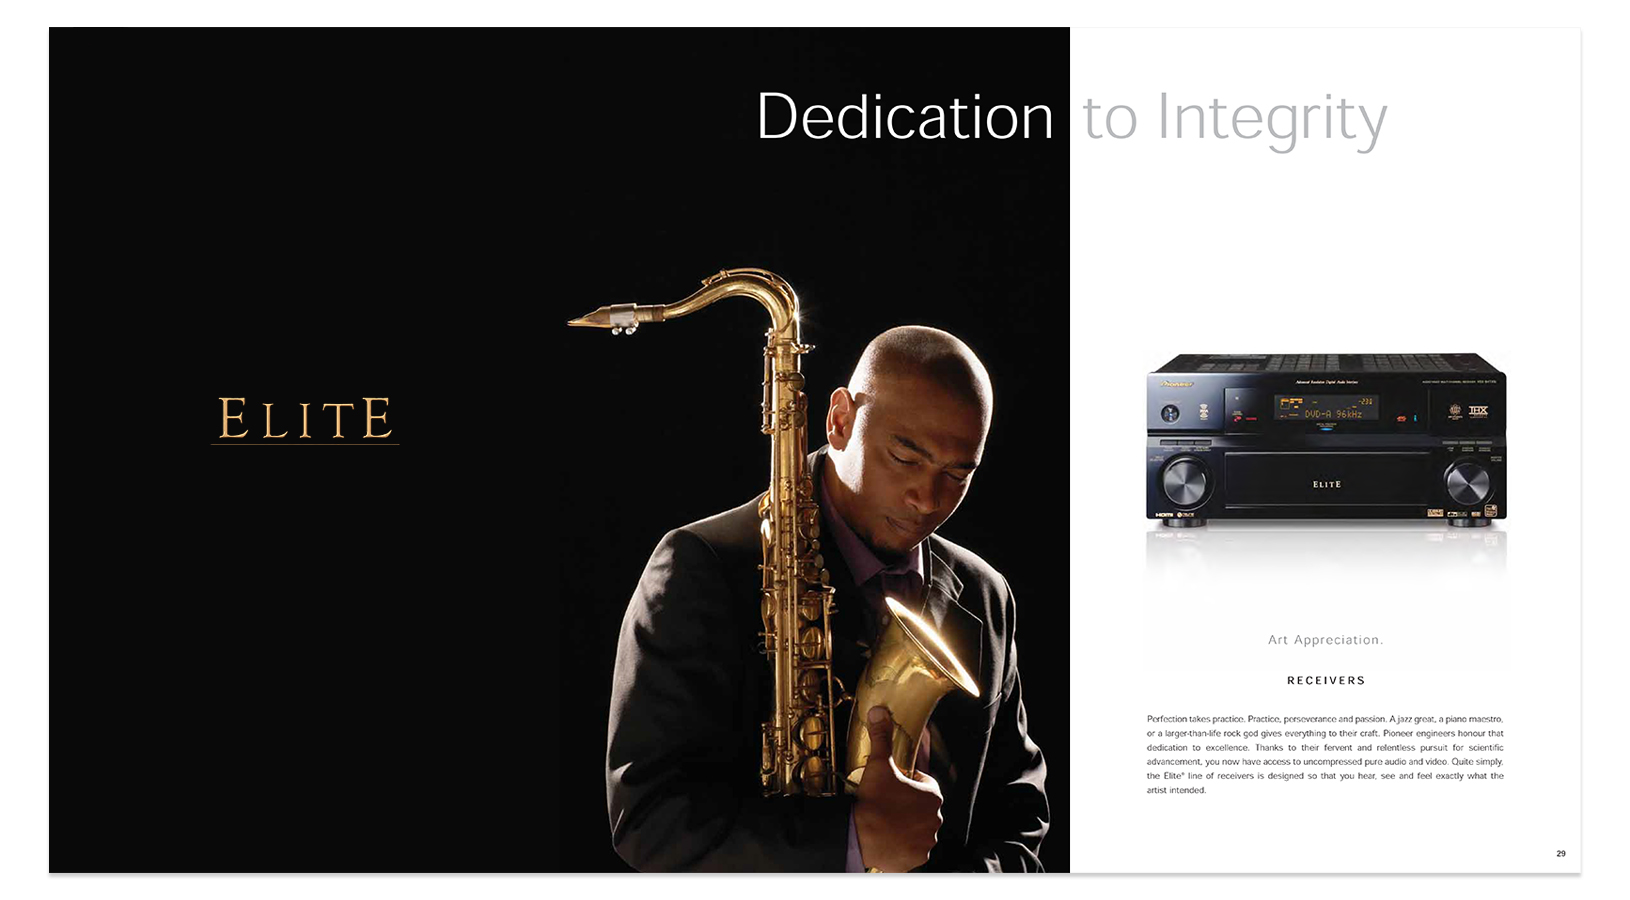 Page about Audio Receivers from Pioneer Elite Catalogue showing a saxophone player lit in high contrast to the black background